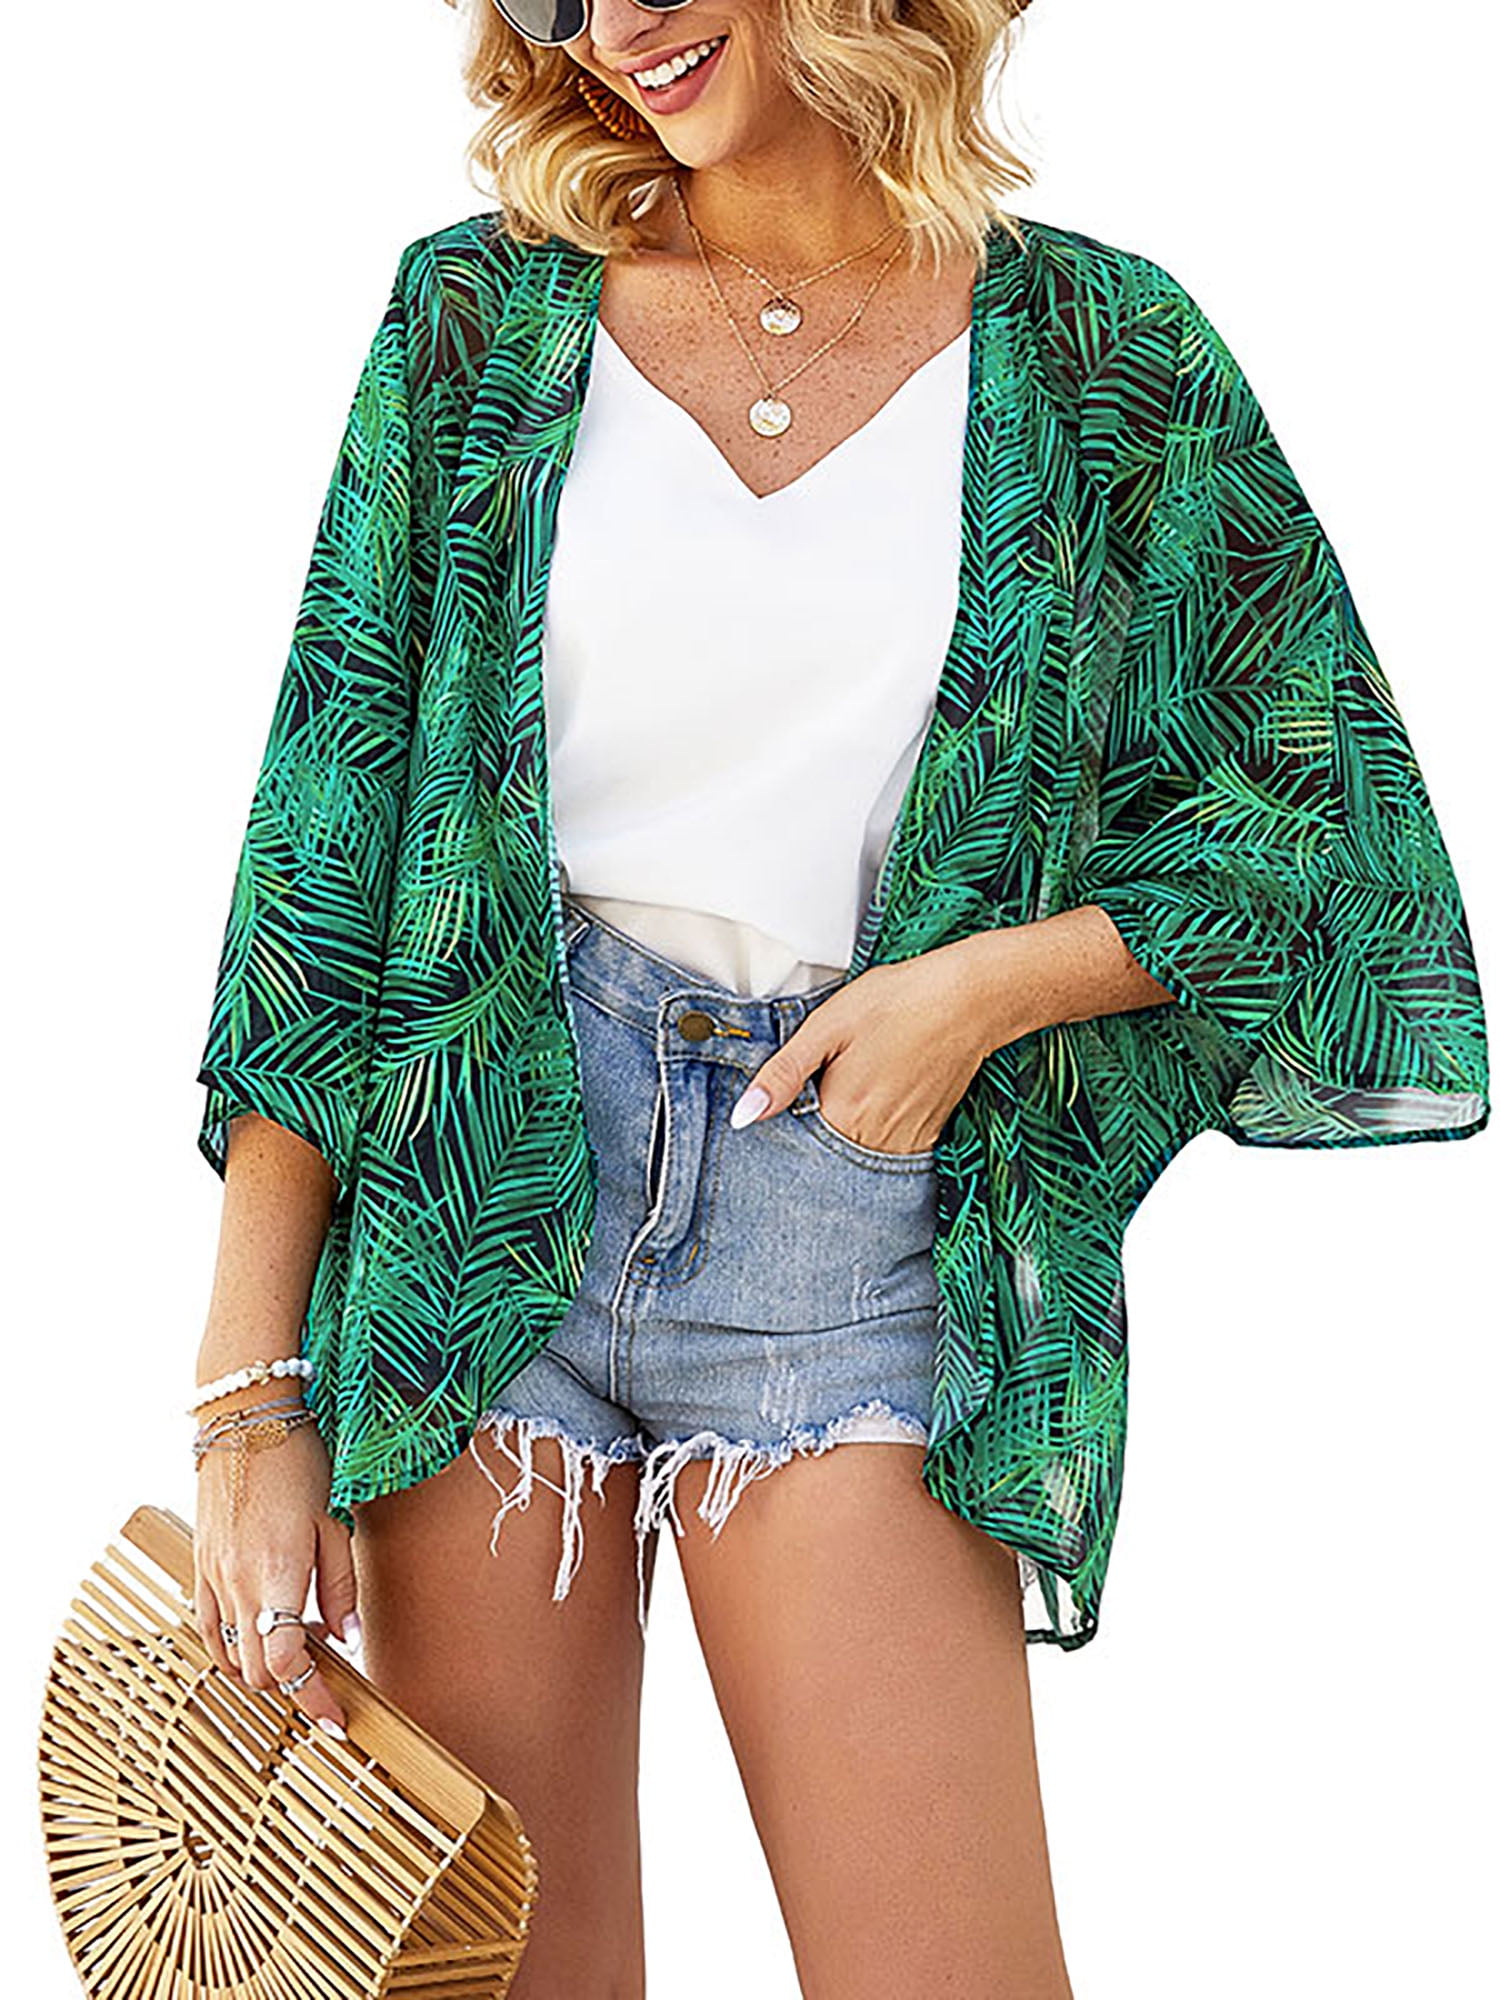 Womens Open Front Cardigans Floral Printed Summer Sun Smock Beach Holiday Jacket